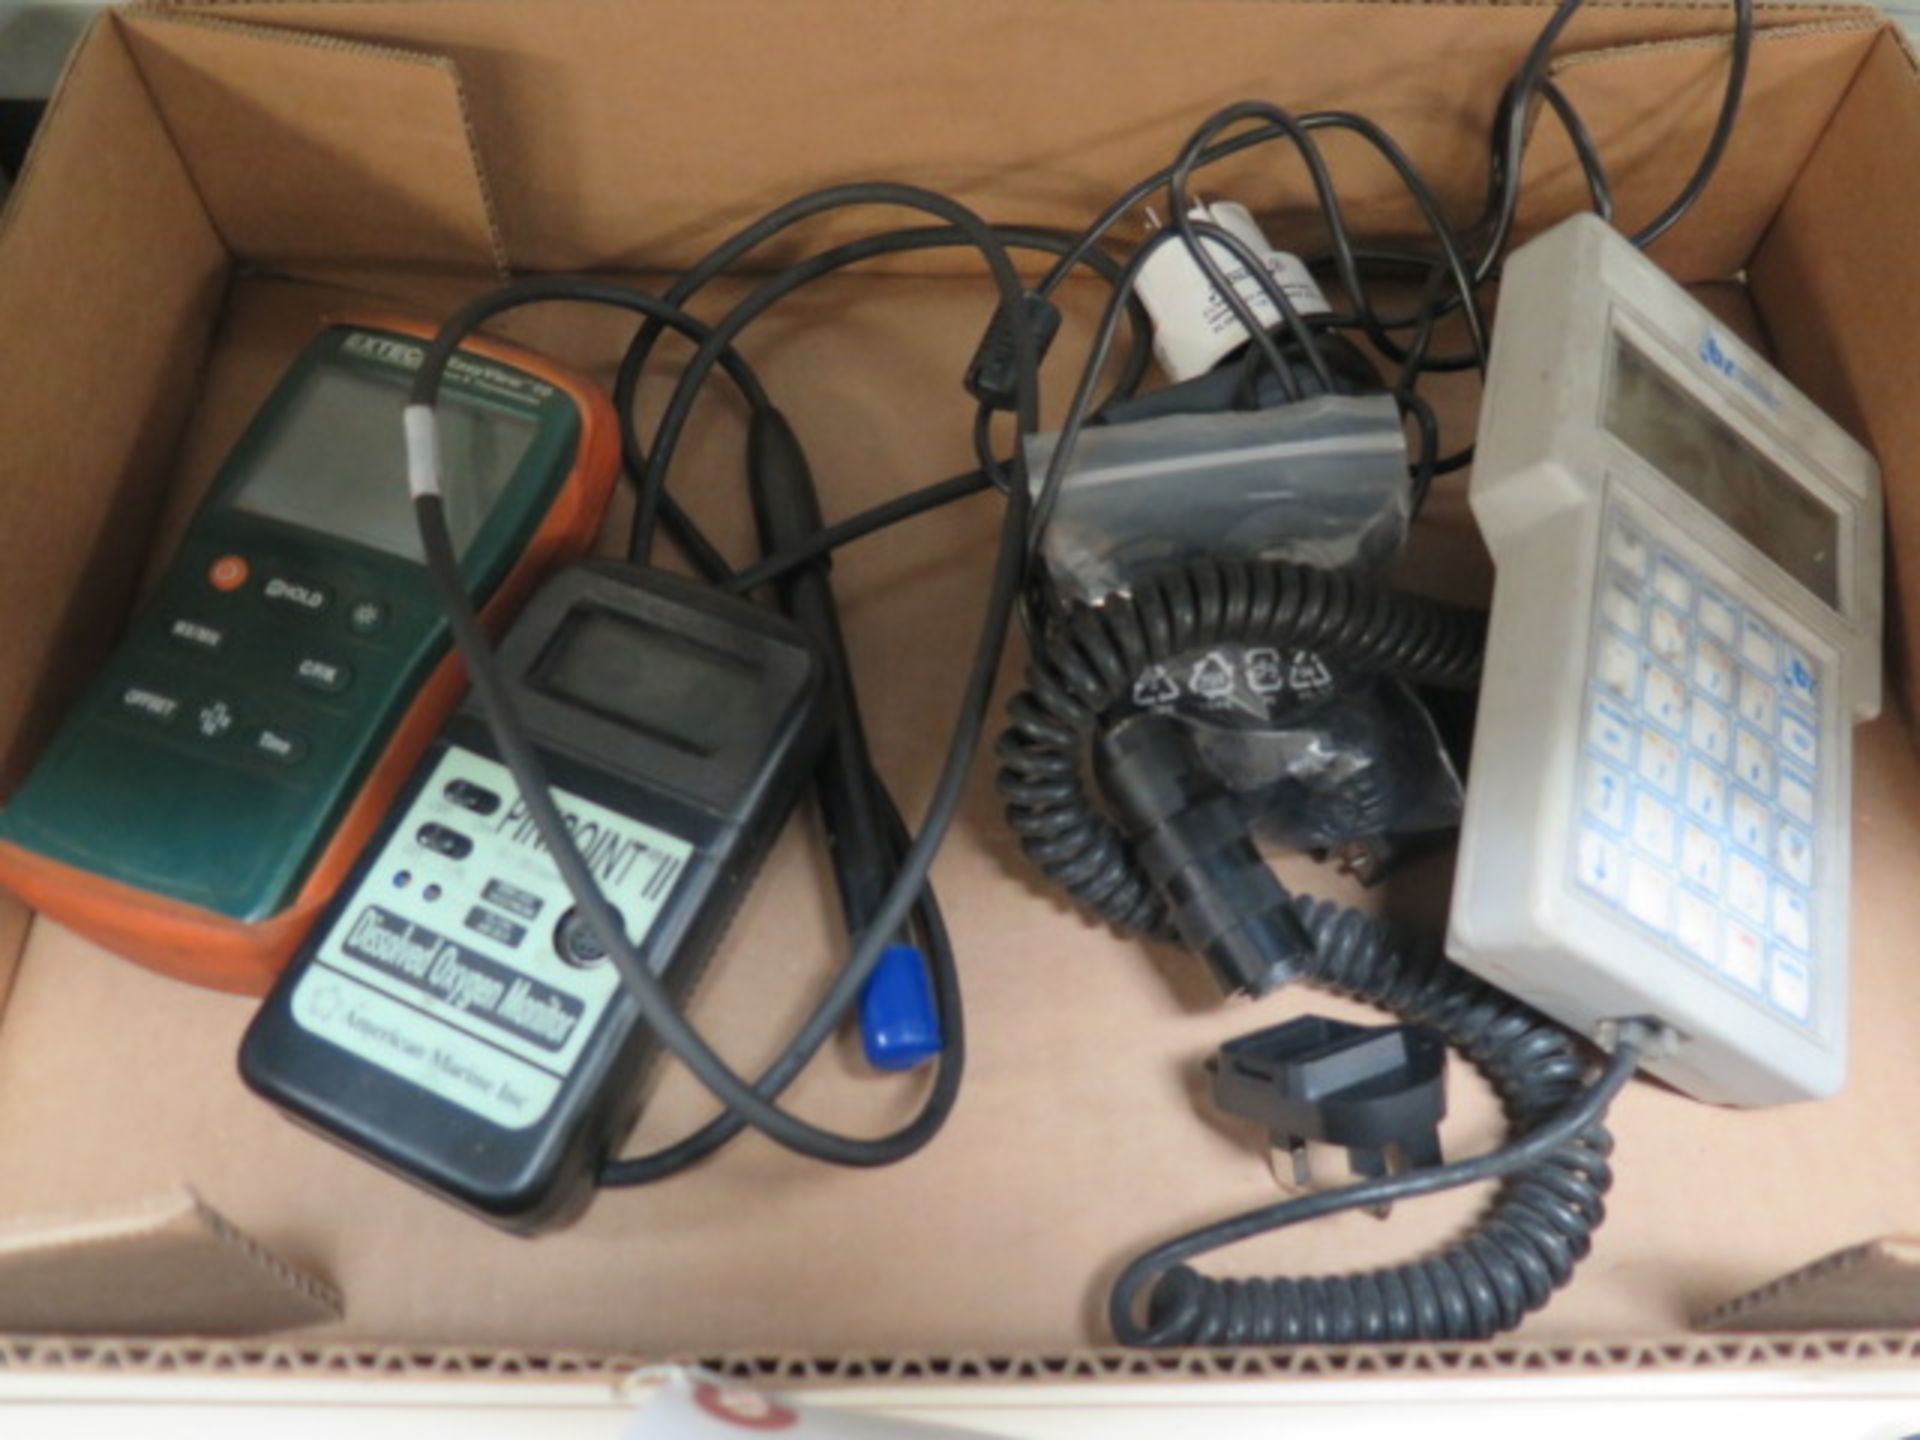 Misc Meters and Monitors, SOLD AS IS AND WITH NO WARRANTY - Image 2 of 2